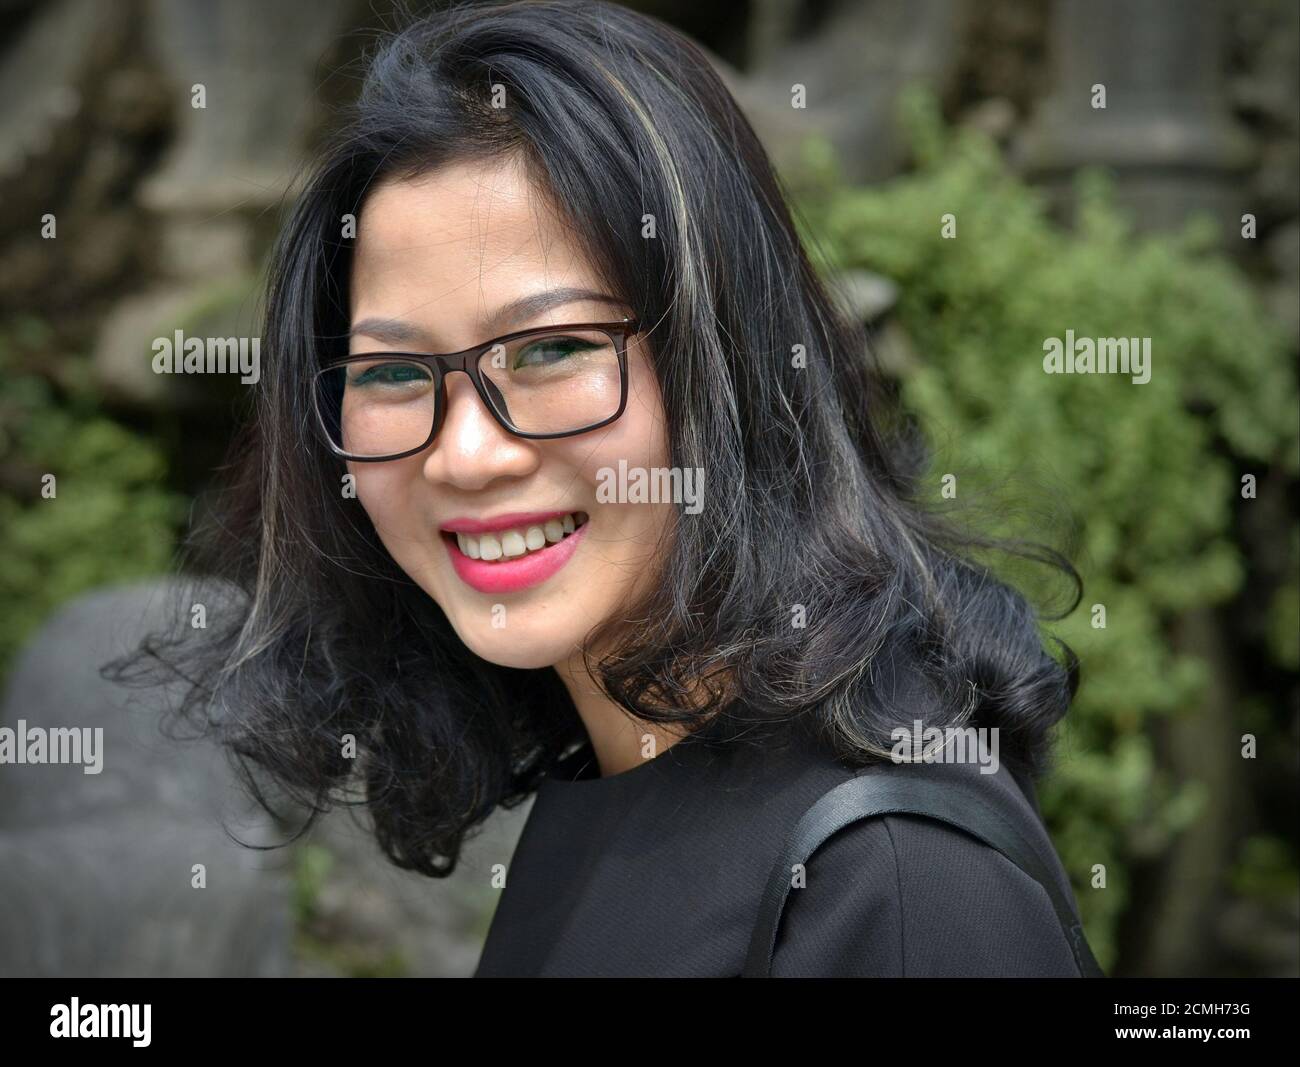 Young attractive cheerful Vietnamese woman with large eyeglasses wears a black top and smiles for the camera. Stock Photo